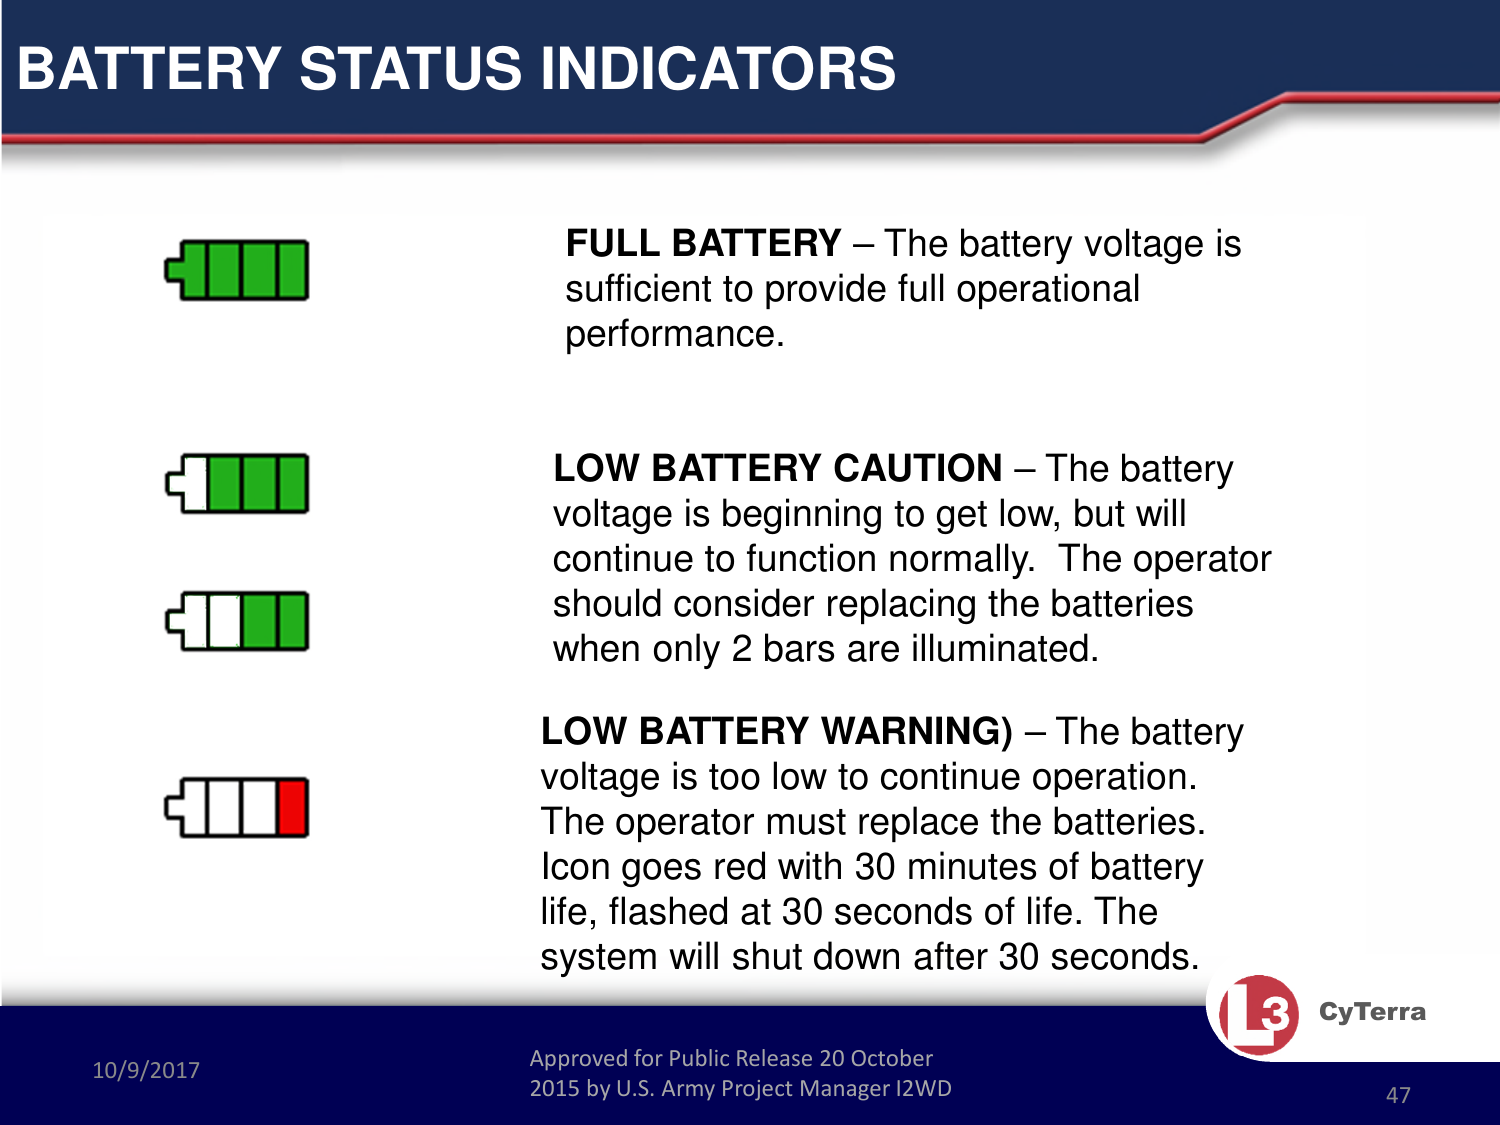 Approved for Public Release 20 October 2015 by U.S. Army Project Manager I2WD10/9/2017 Approved for Public Release 20 October 2015 by U.S. Army Project Manager I2WD 47CyTerraBATTERY STATUS INDICATORSFULL BATTERY – The battery voltage is sufficient to provide full operational performance.  LOW BATTERY CAUTION – The battery voltage is beginning to get low, but will continue to function normally.  The operator should consider replacing the batteries when only 2 bars are illuminated.LOW BATTERY WARNING) – The battery voltage is too low to continue operation.  The operator must replace the batteries. Icon goes red with 30 minutes of battery life, flashed at 30 seconds of life. The system will shut down after 30 seconds.